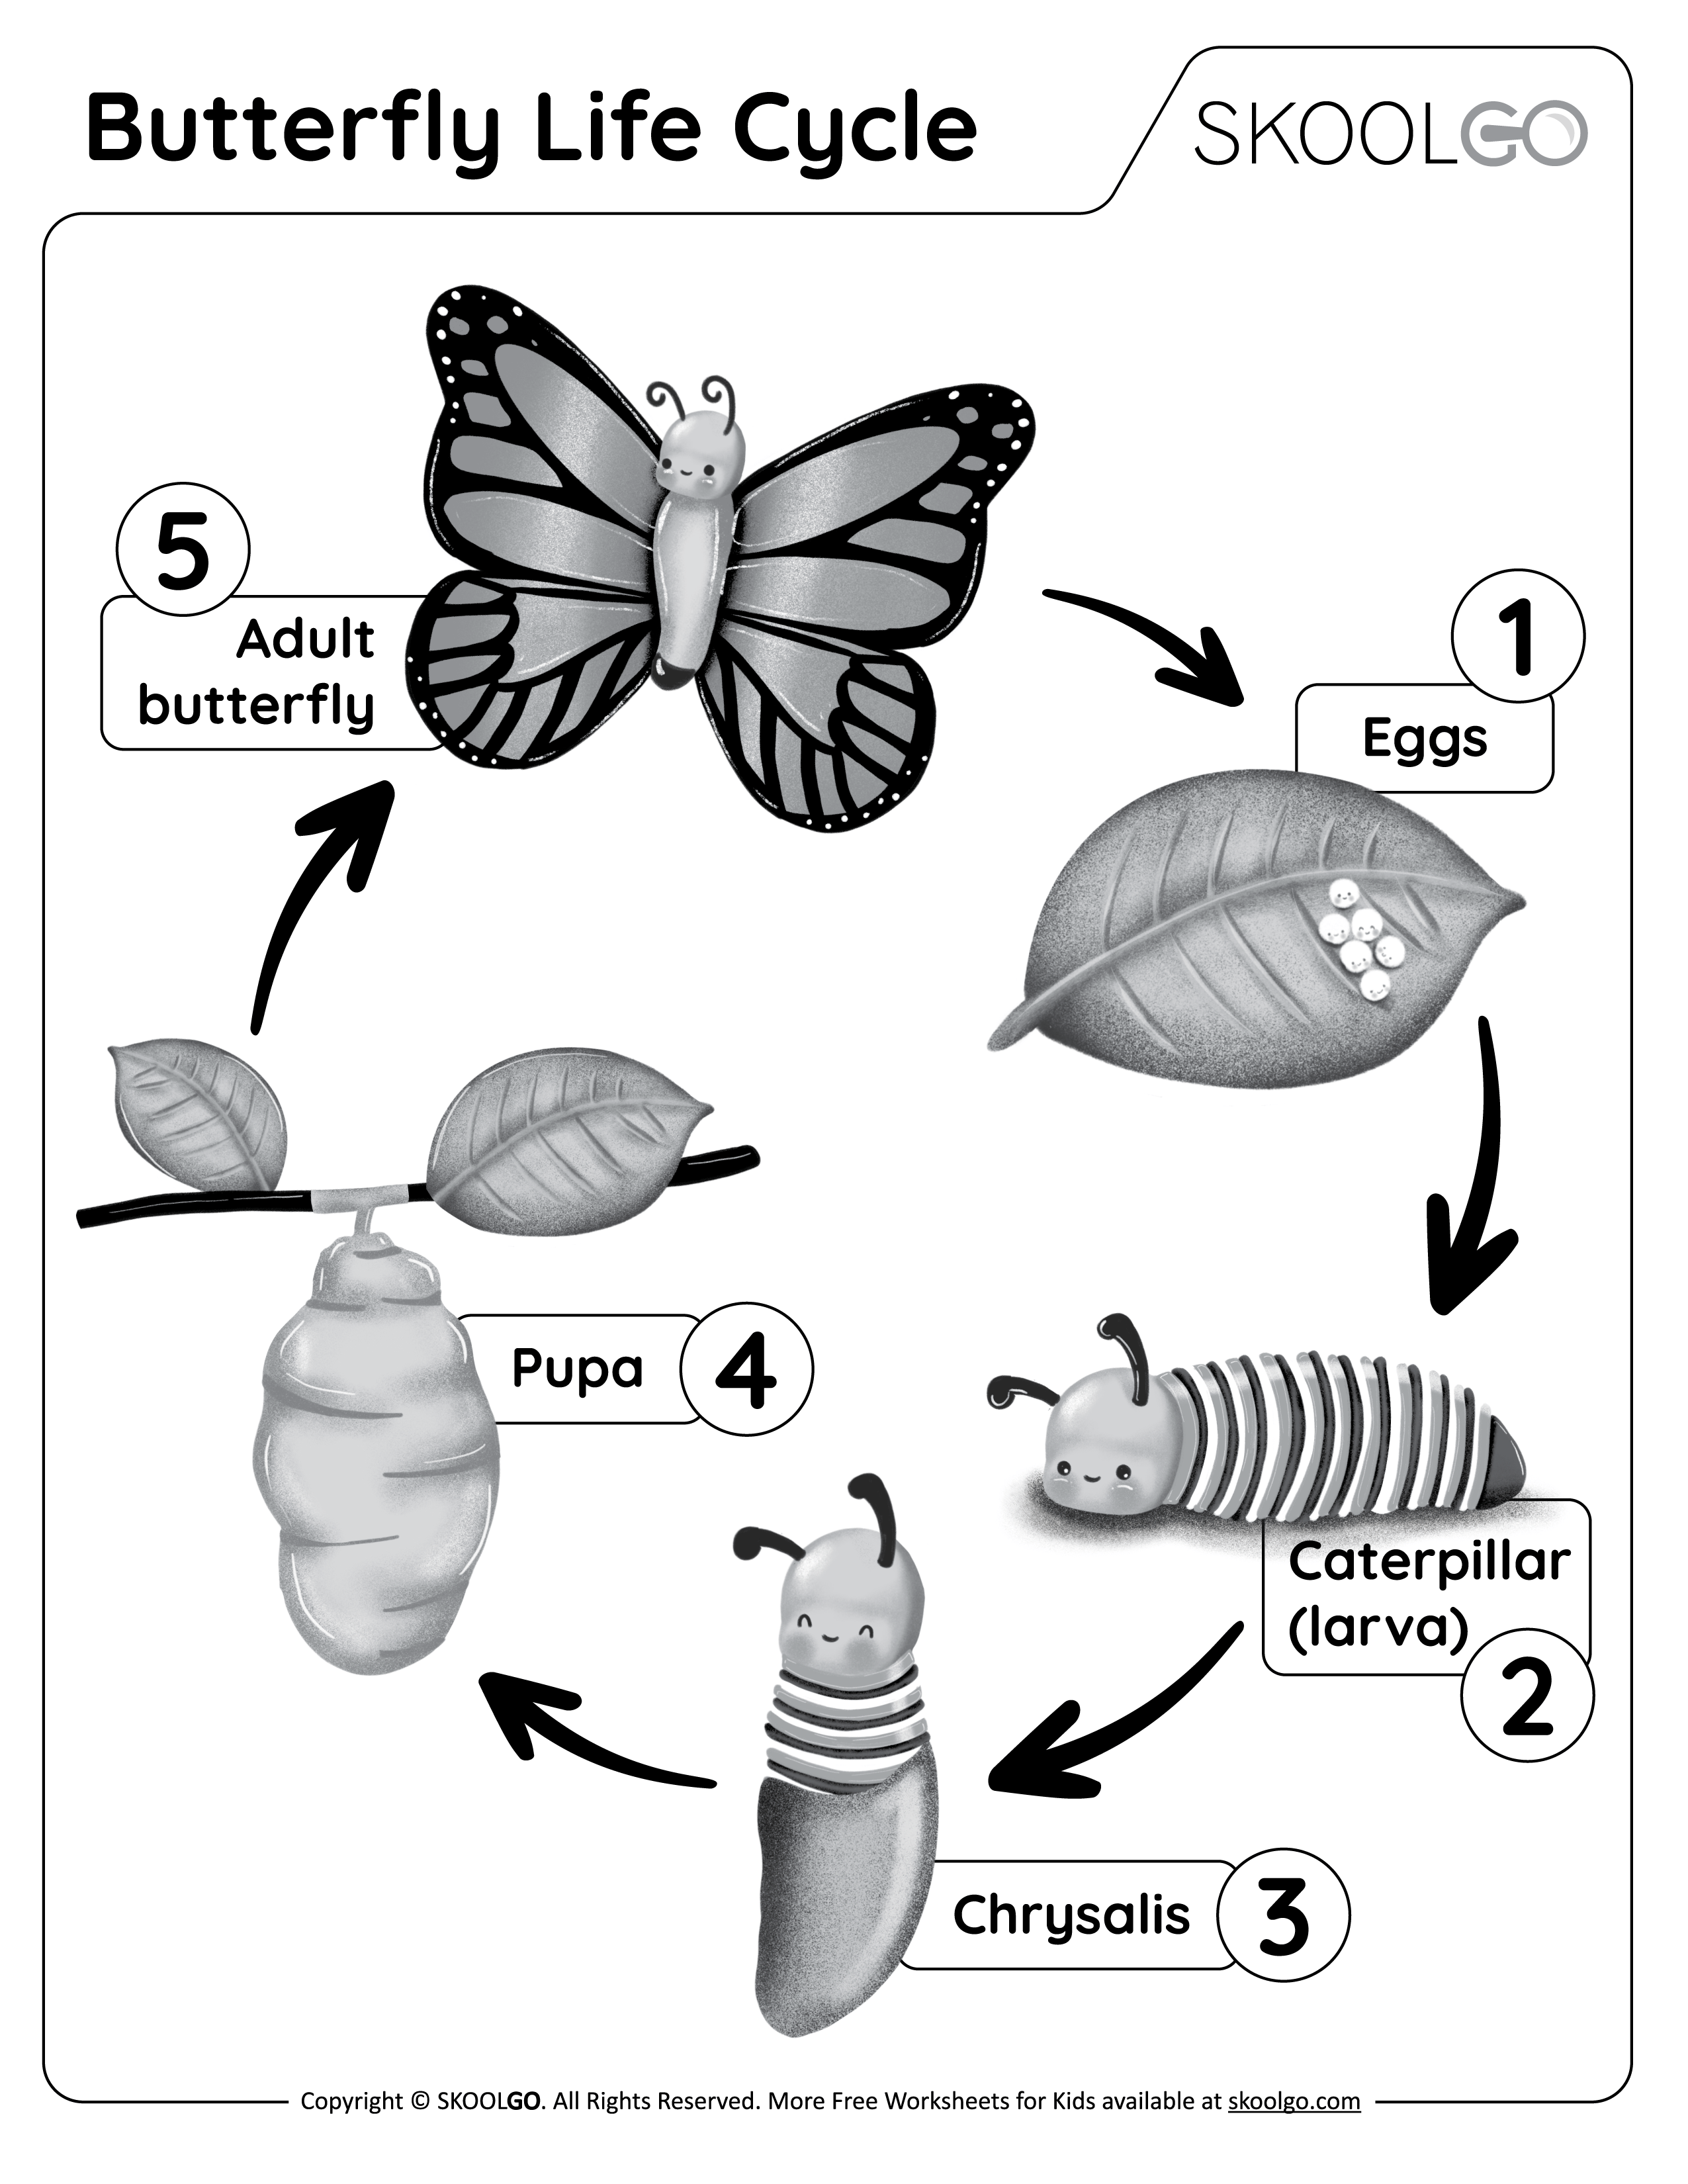 Butterfly Life Cycle - Free Black and White Worksheet for Kids